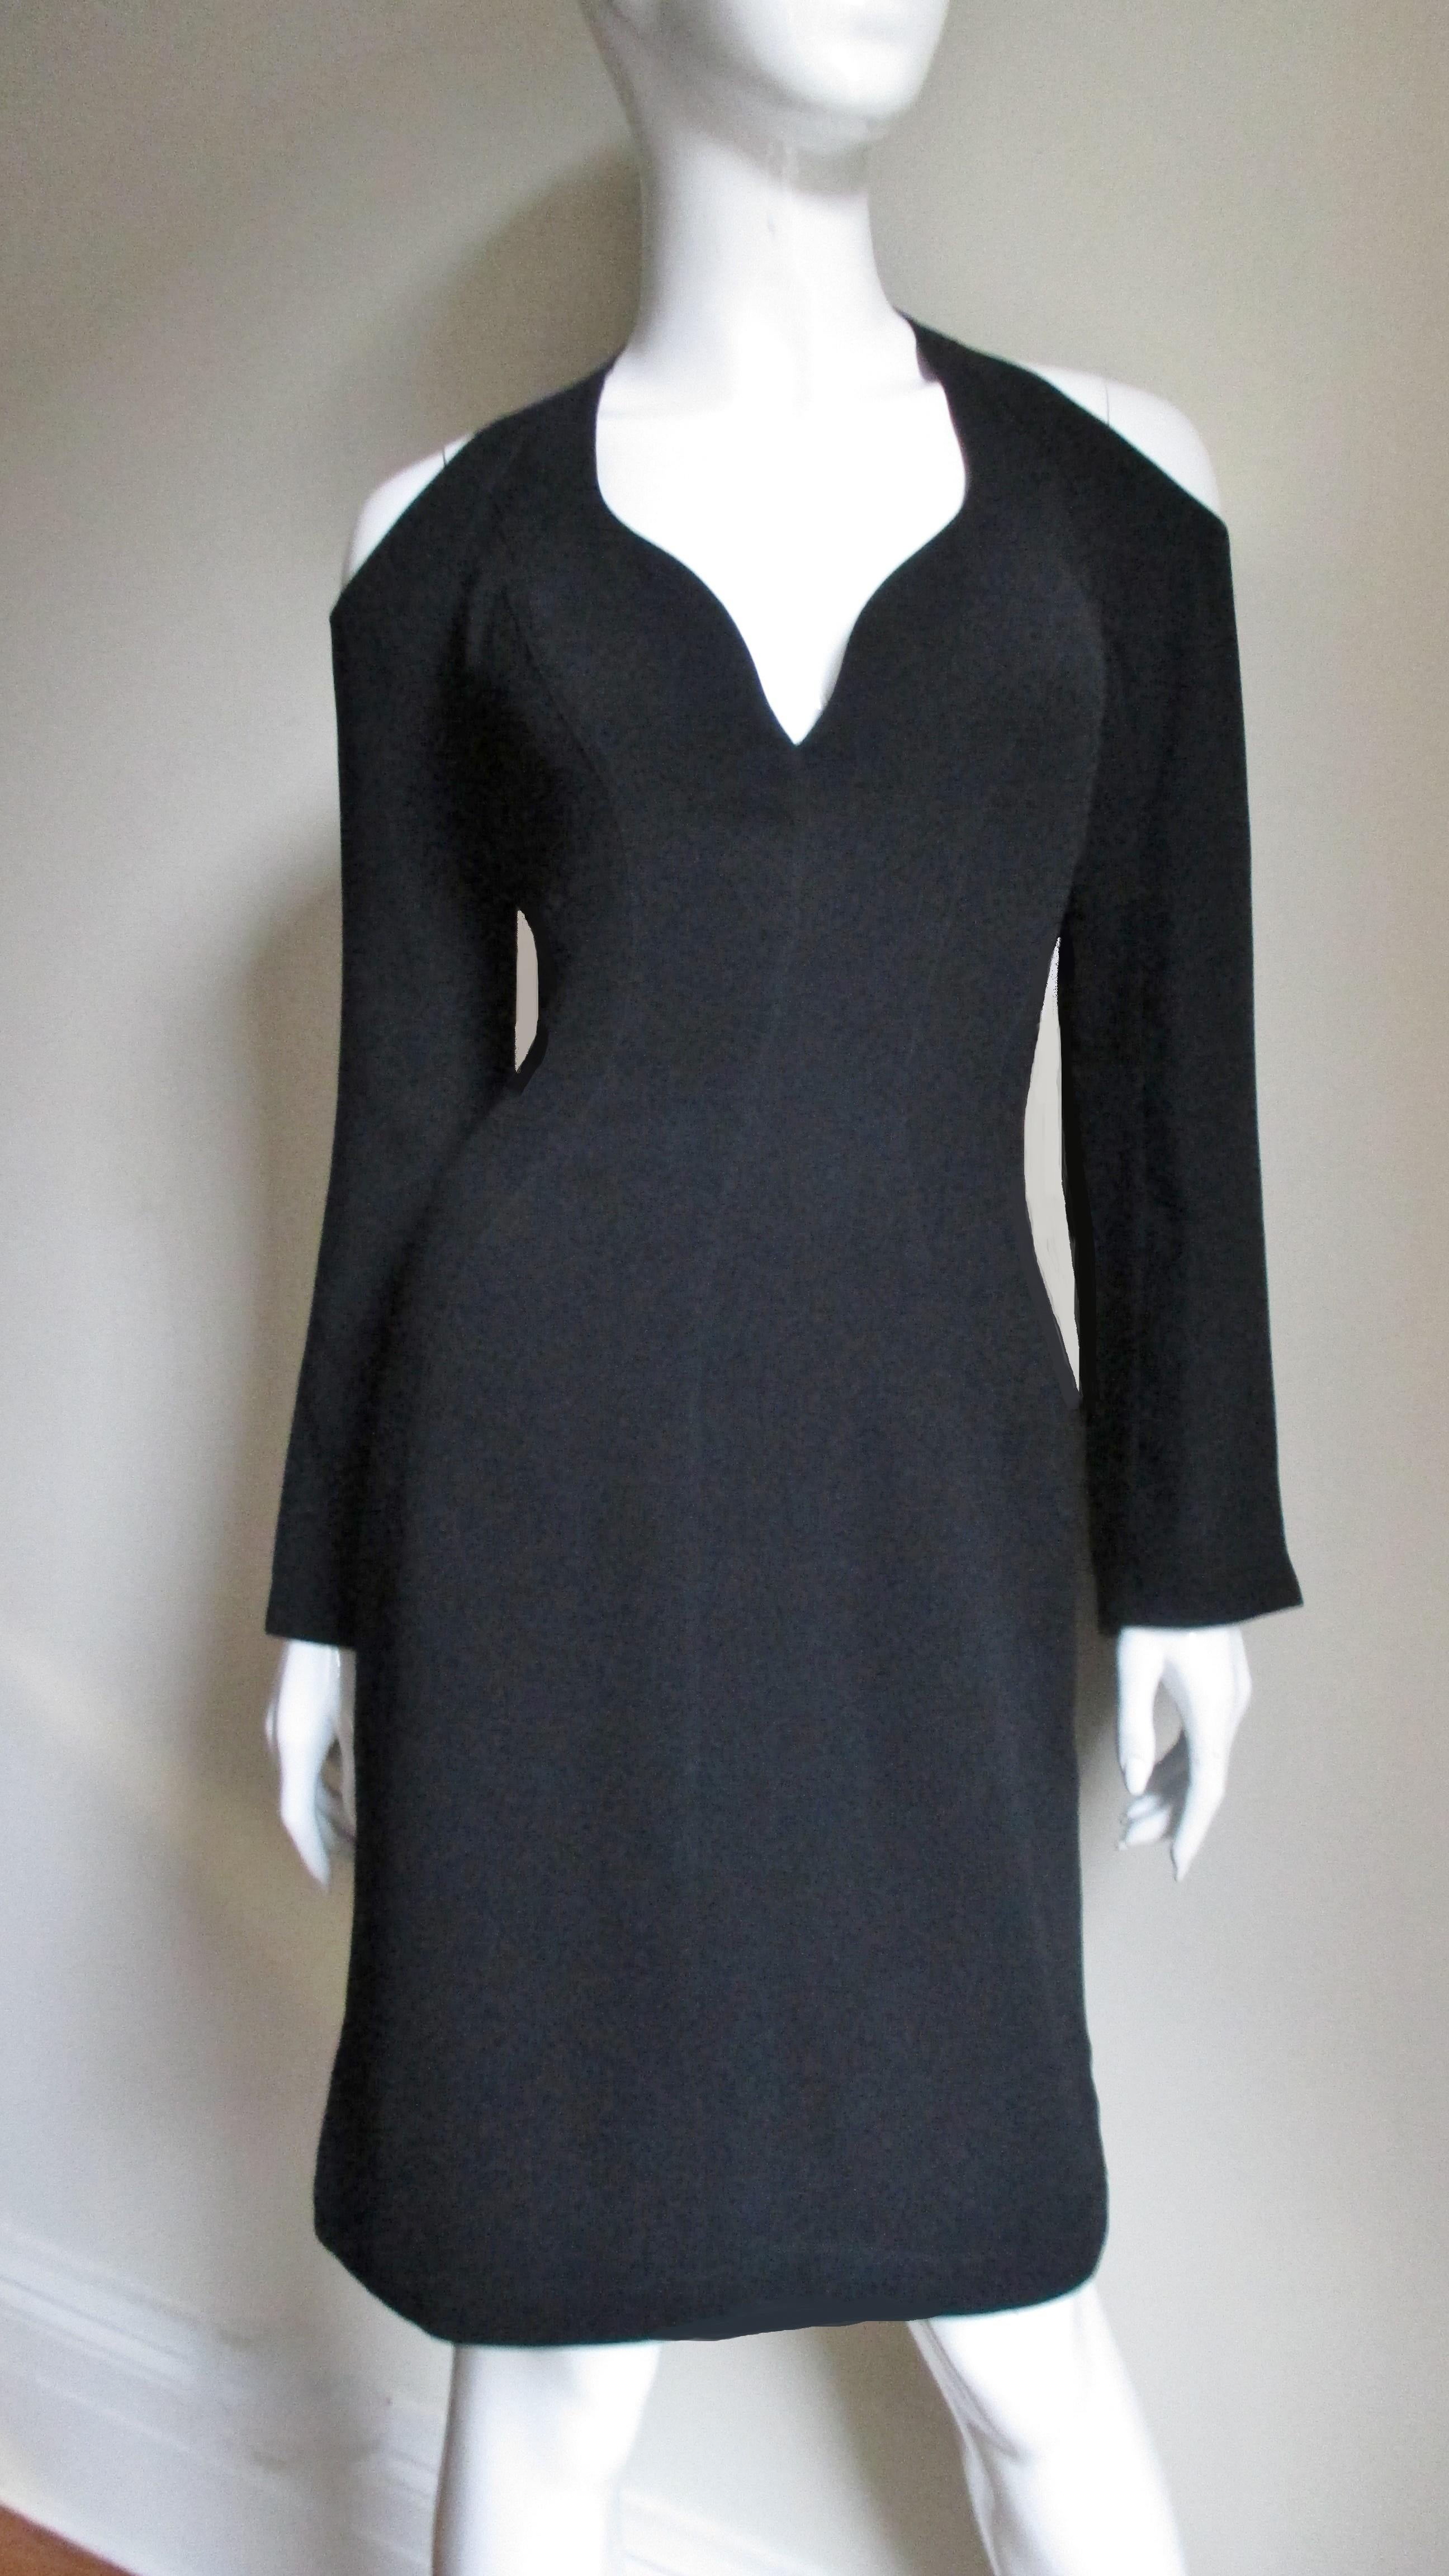 A sexy shoulder and cleavage baring dress in a rich black synthetic blend from Thierry Mugler.   It has a sweetheart plunge neckline, long sleeves that gently flare to the cuff and exposed shoulders front and back. A simple fitted dress with lots of